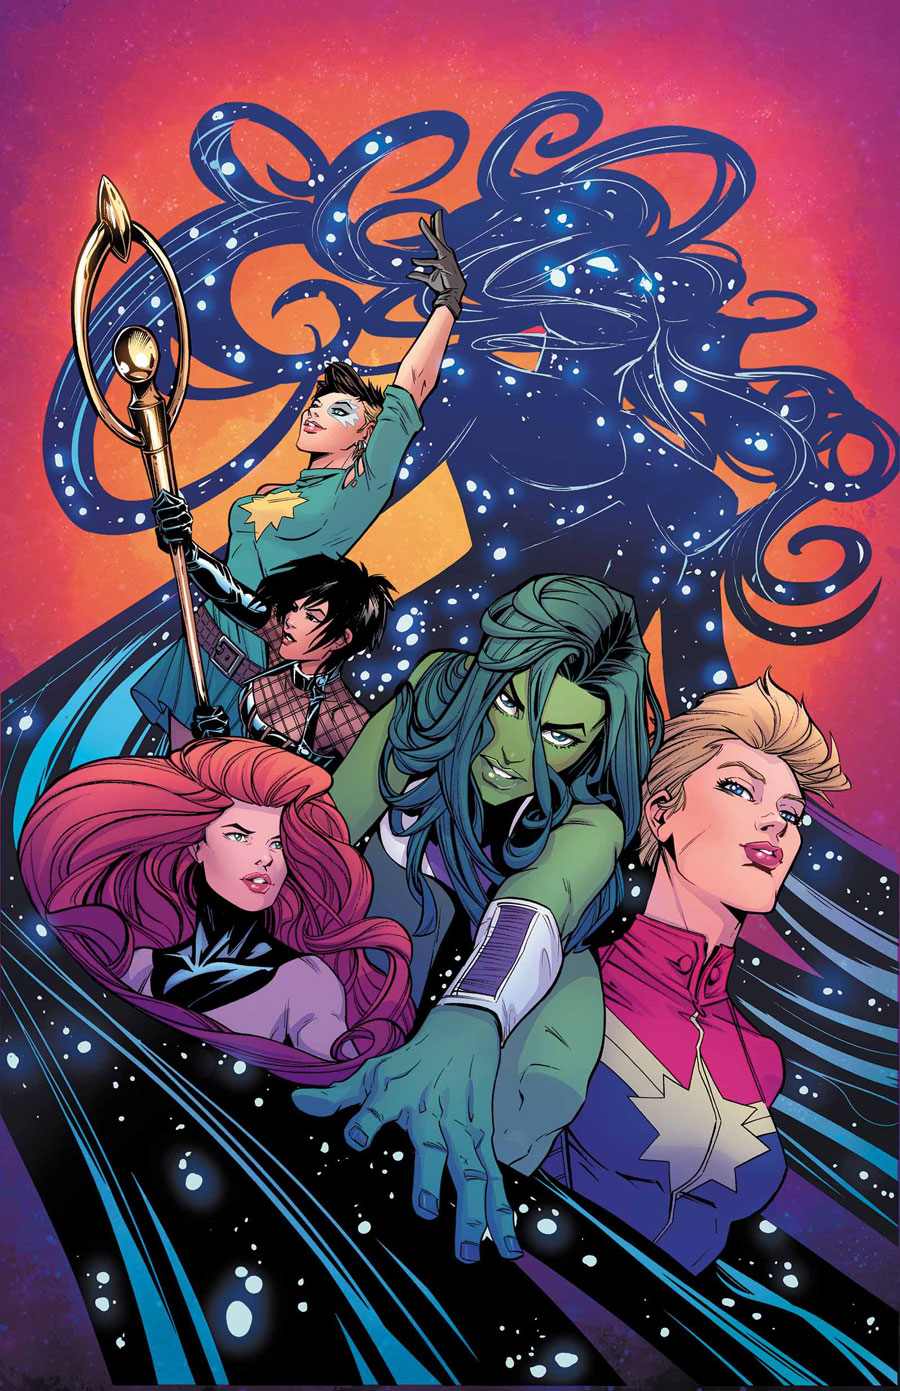 A-Force, Vol. 0 by G. Willow Wilson